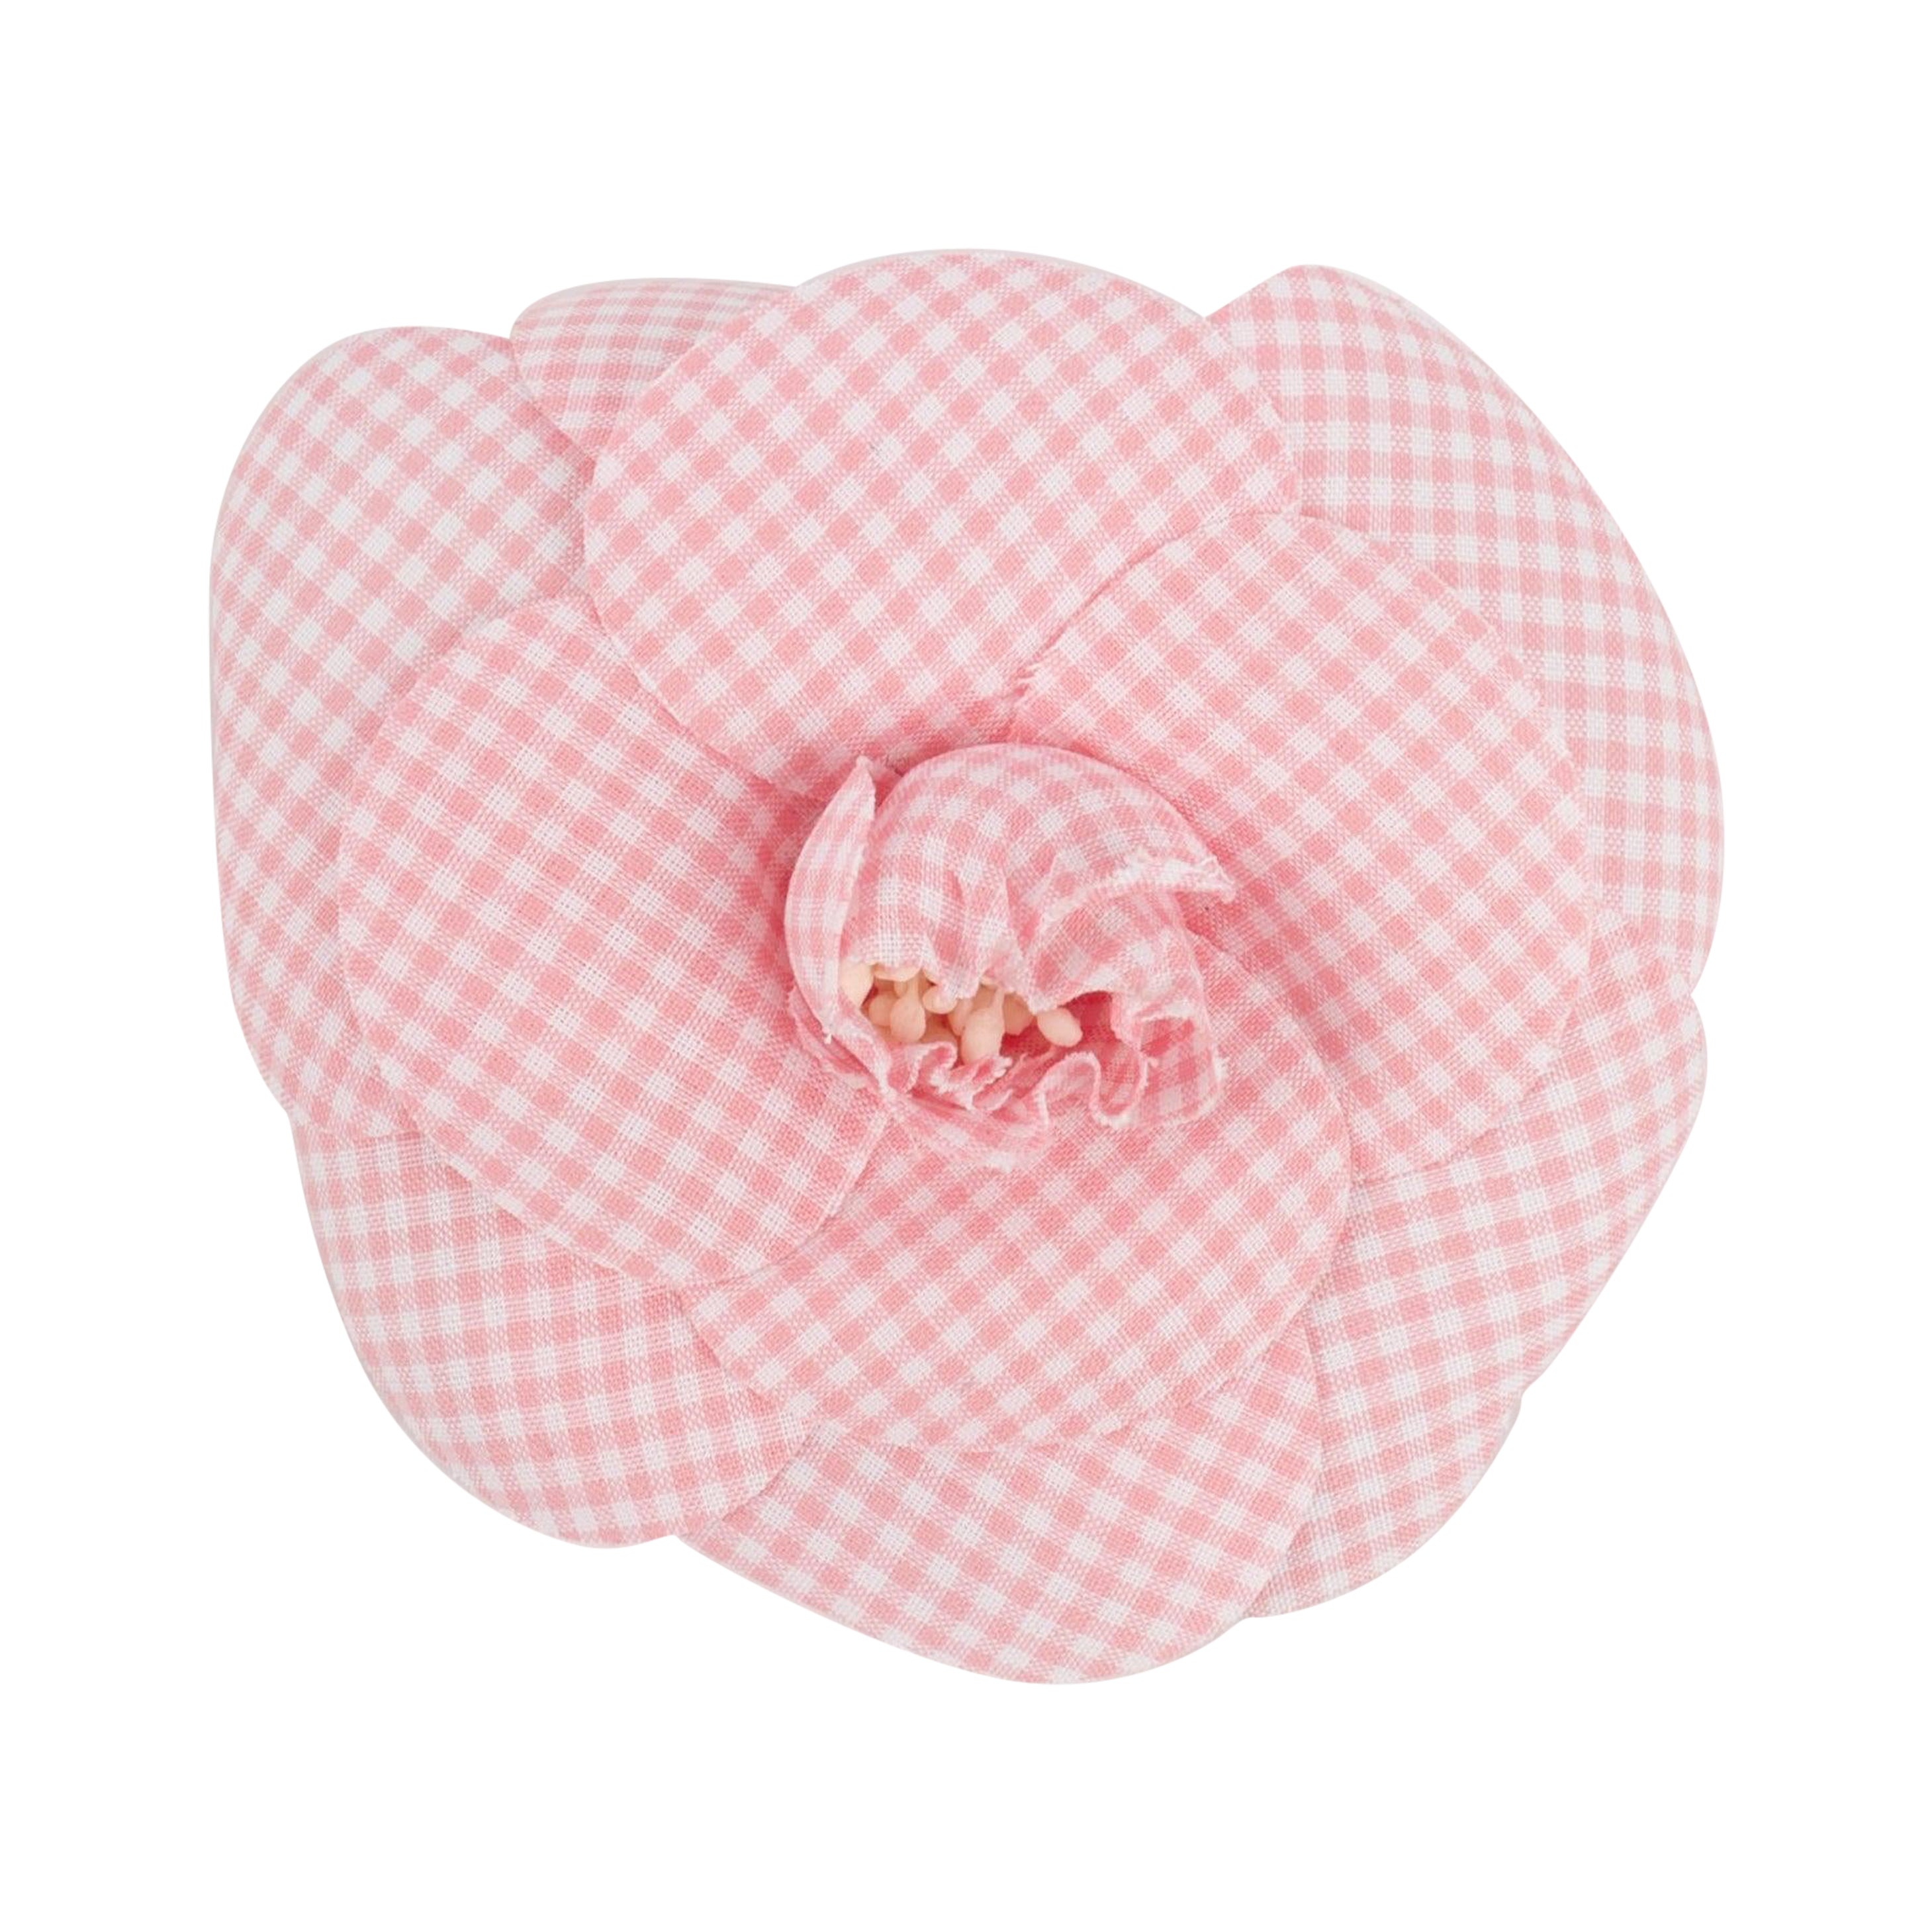 Chanel Camellia Brooch Made of Pink and White Gingham Fabric, 1990s